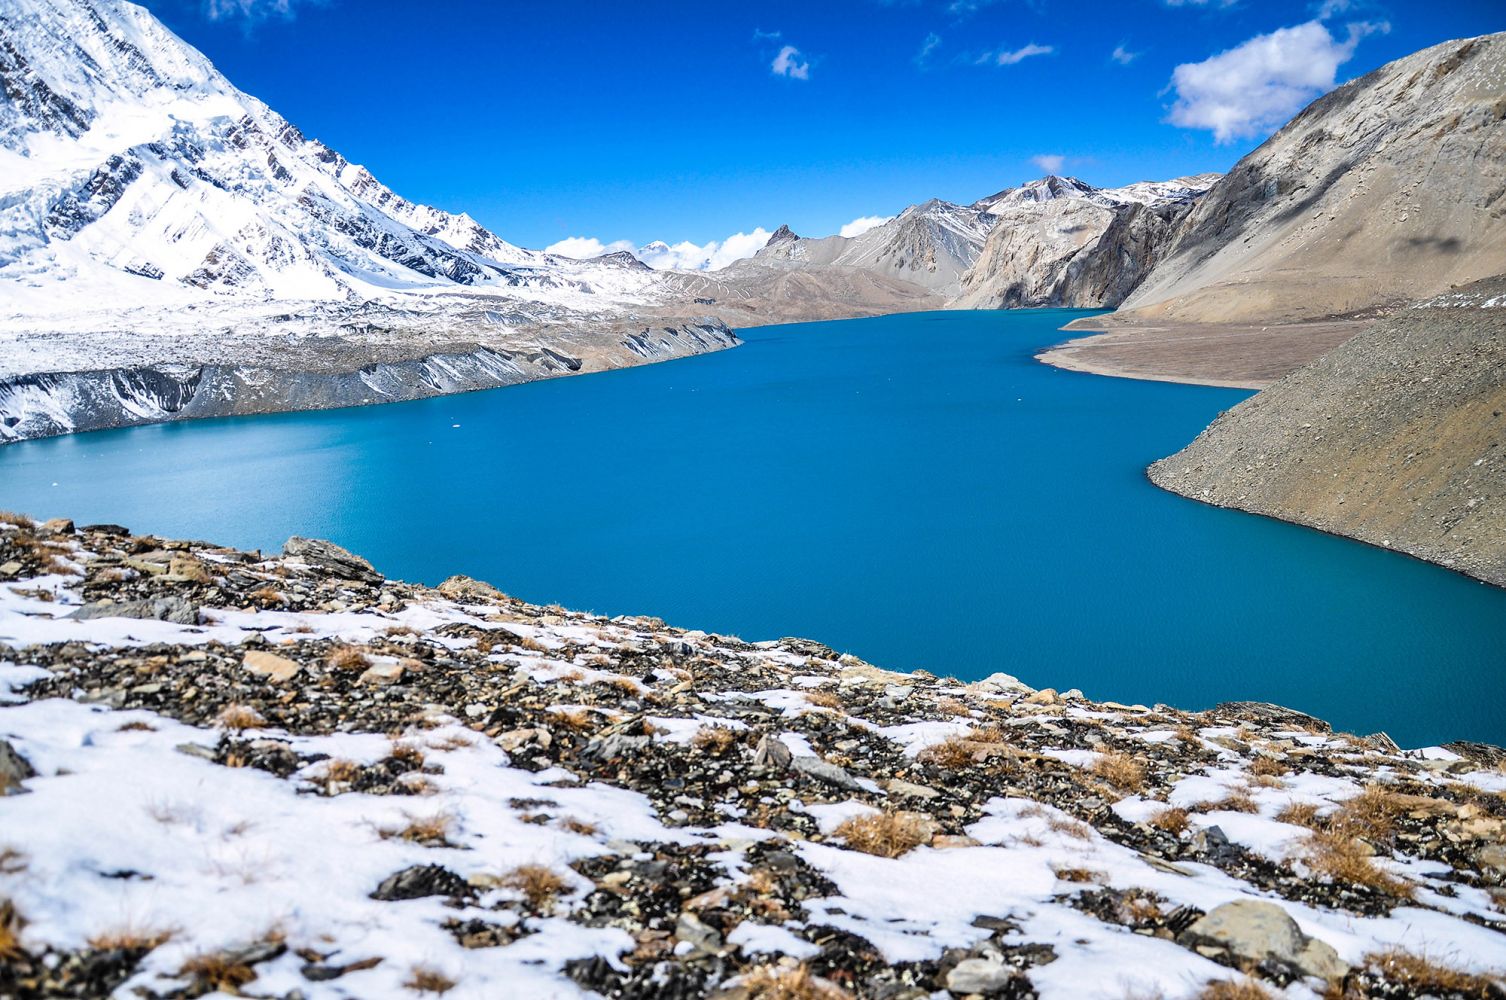 One of the world’s highest lakes, Tilicho Lake sits at 4,919 meters (16,138 ft.) in the Annapurna mountain range in Manang, Nepal.